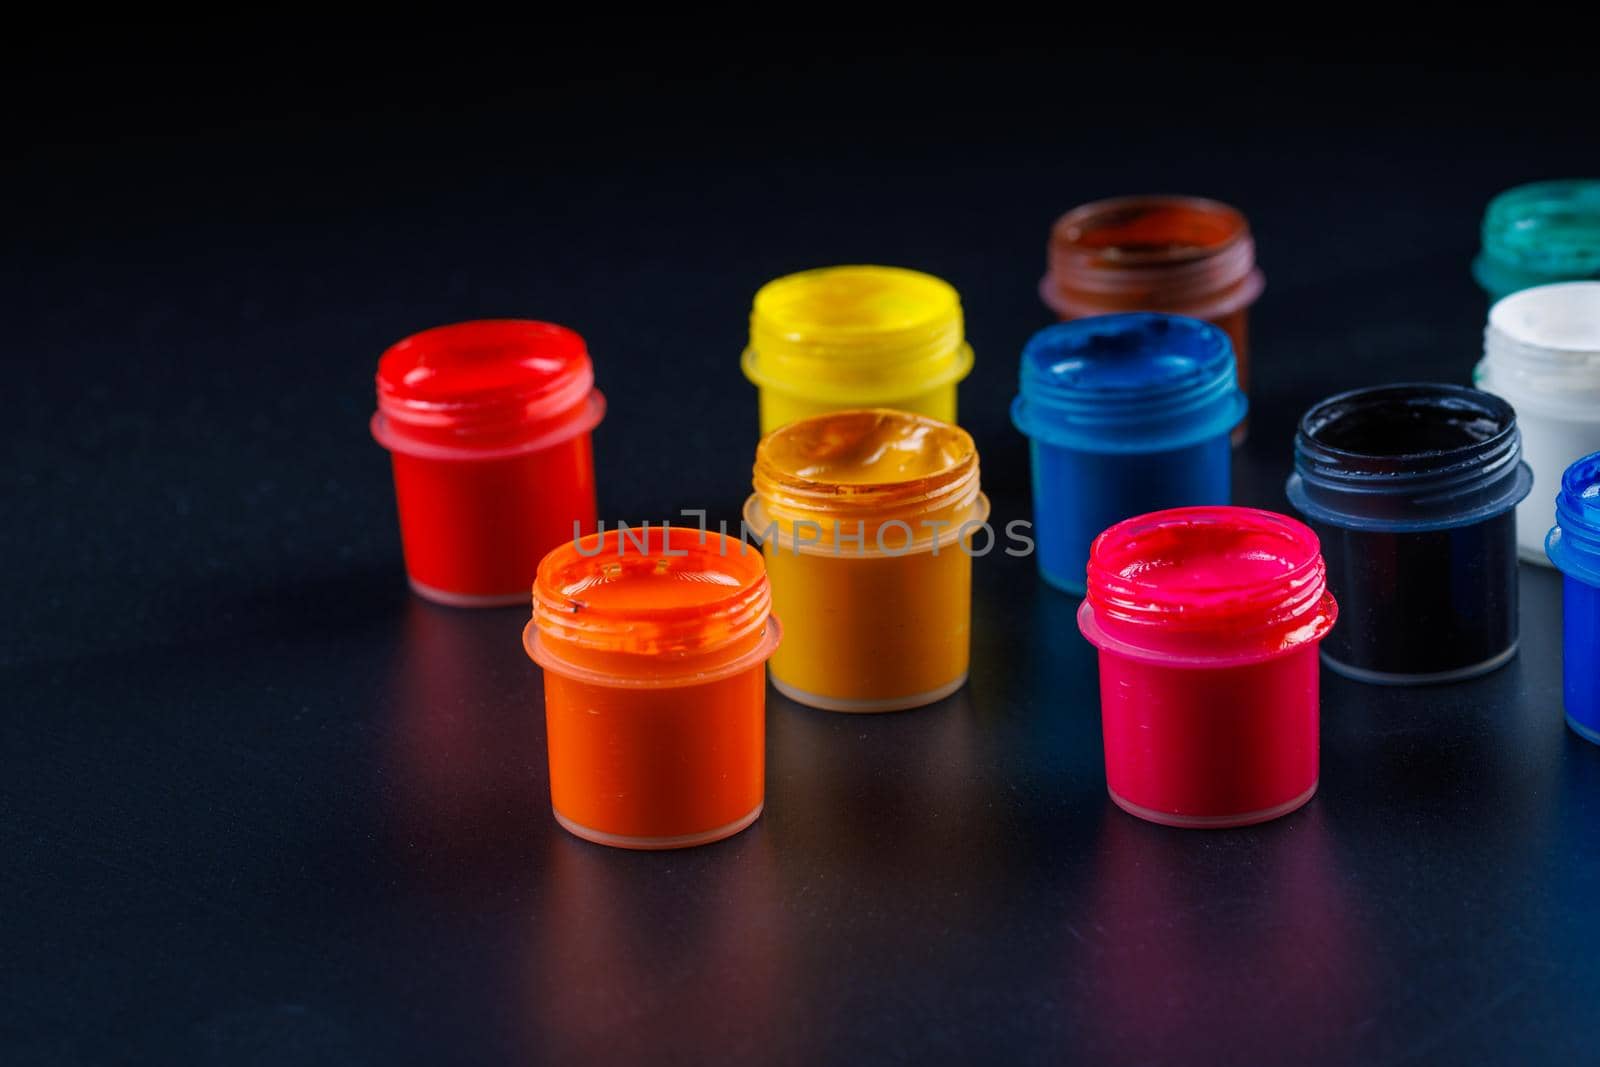 close-up background of opened small gouache paint jars on black surface by z1b